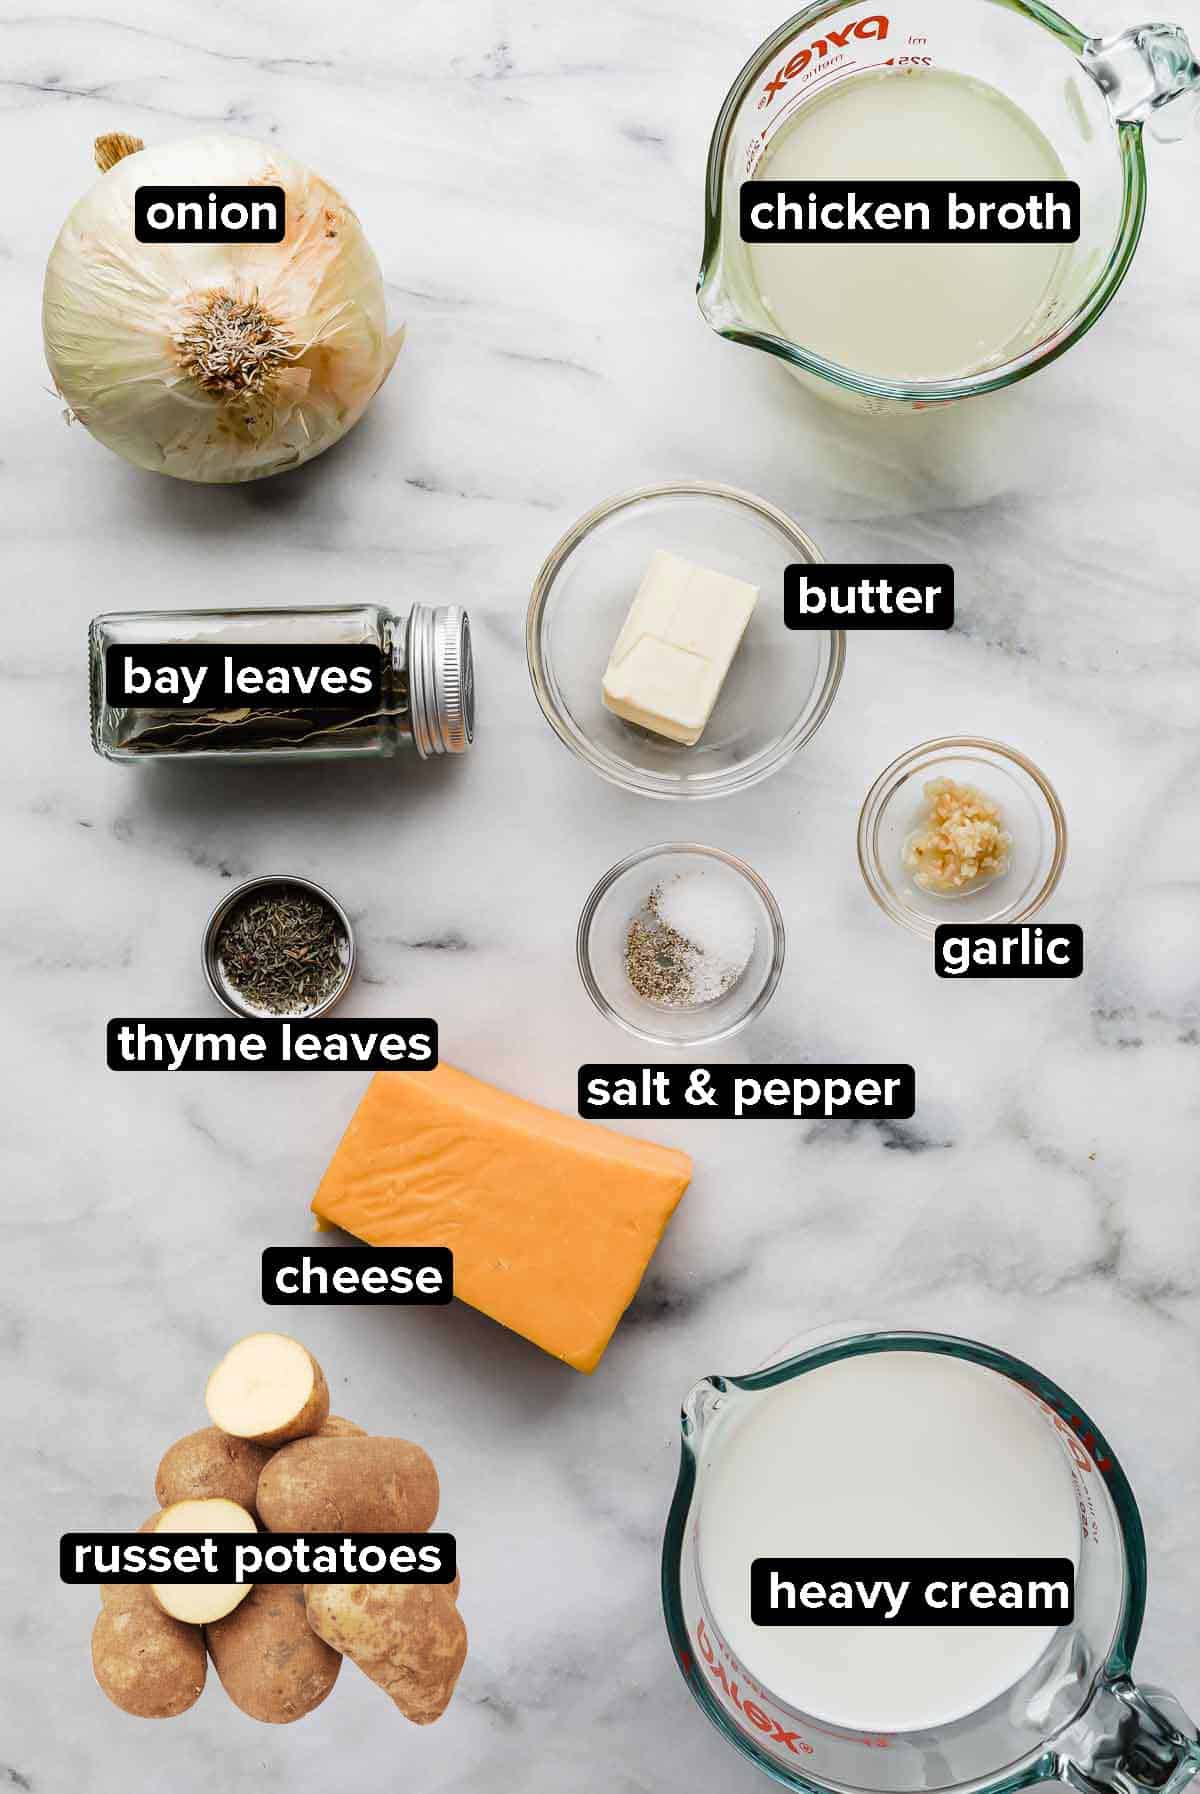 Scalloped potato recipe ingredients portioned into glass bowls on a white and gray marble background.